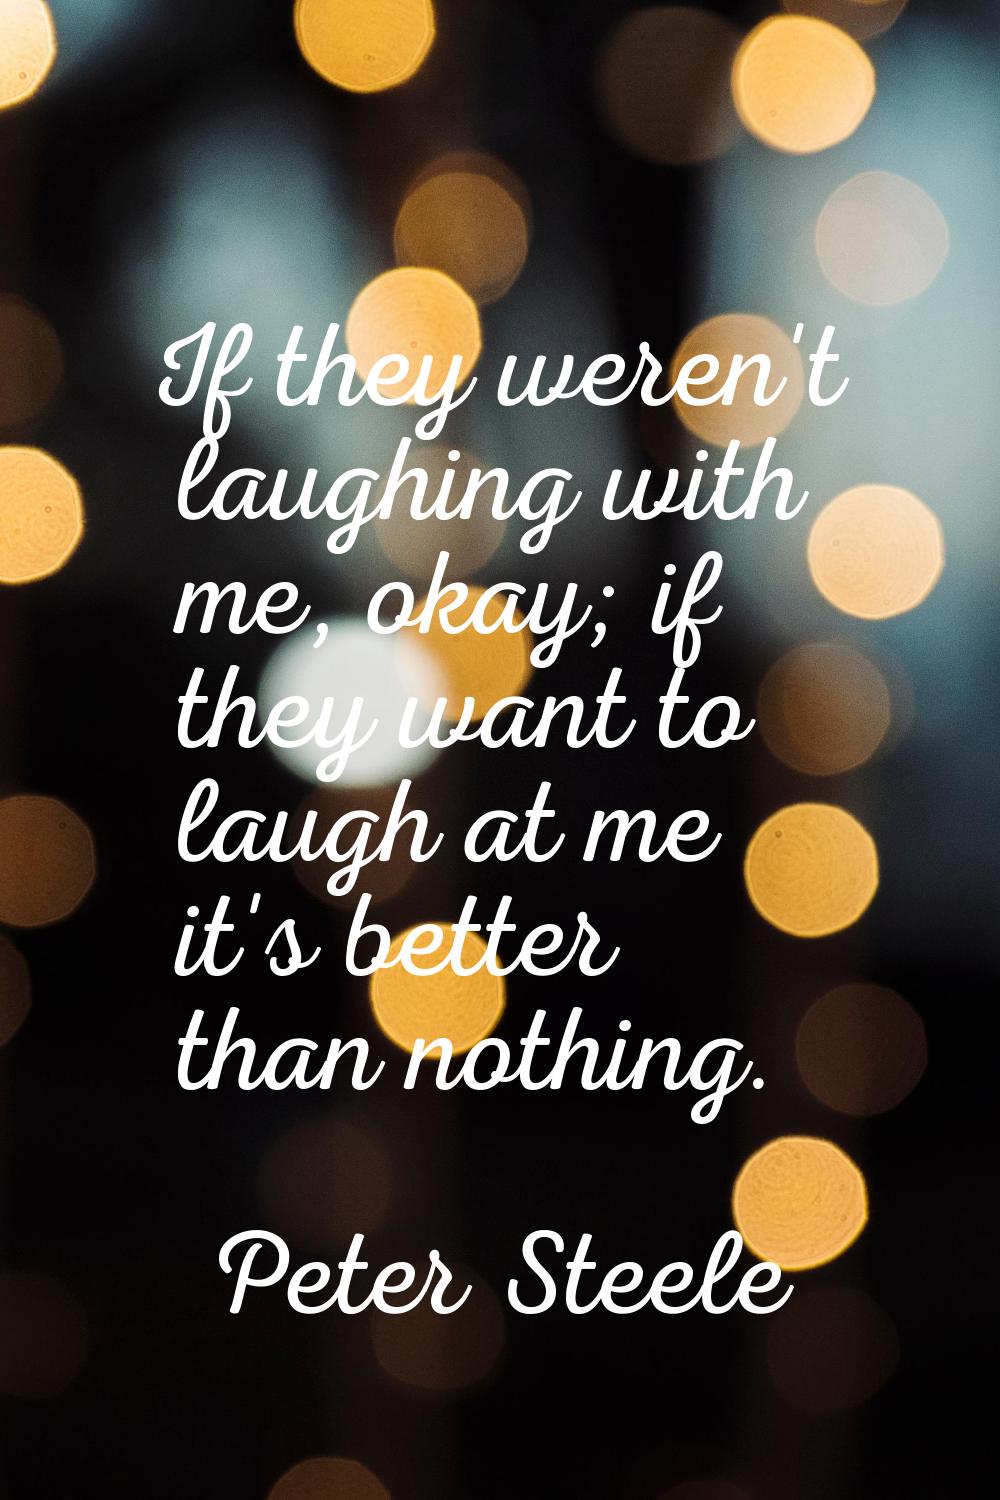 If they weren't laughing with me, okay; if they want to laugh at me it's better than nothing.